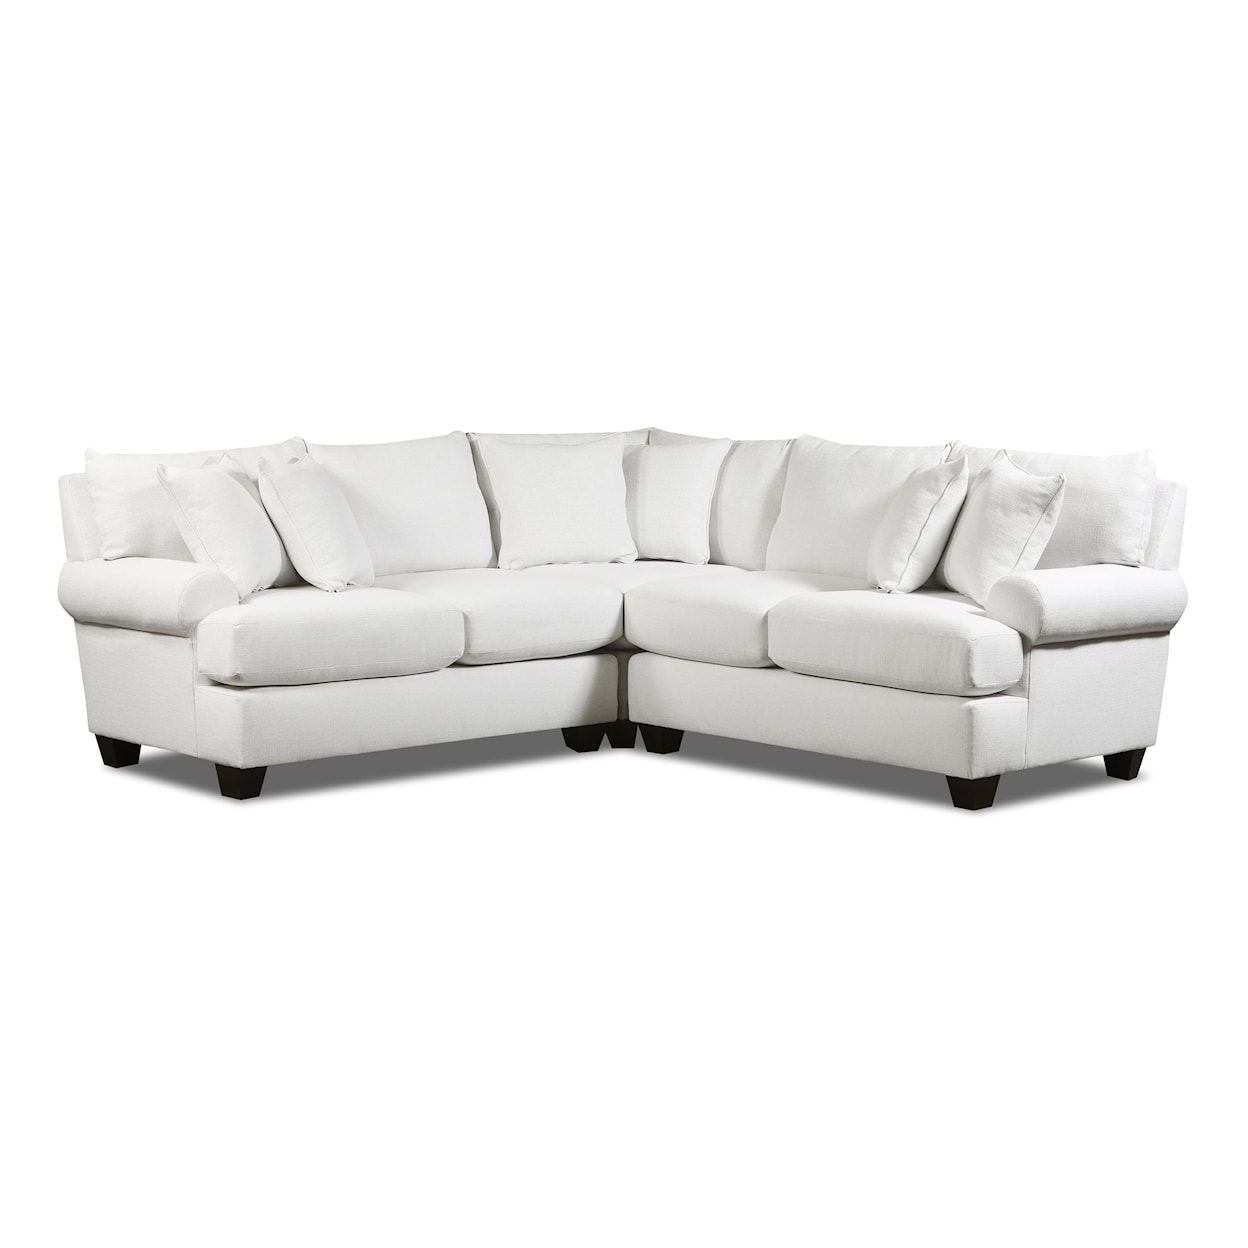 The Mix Margo 3-Piece Sectional